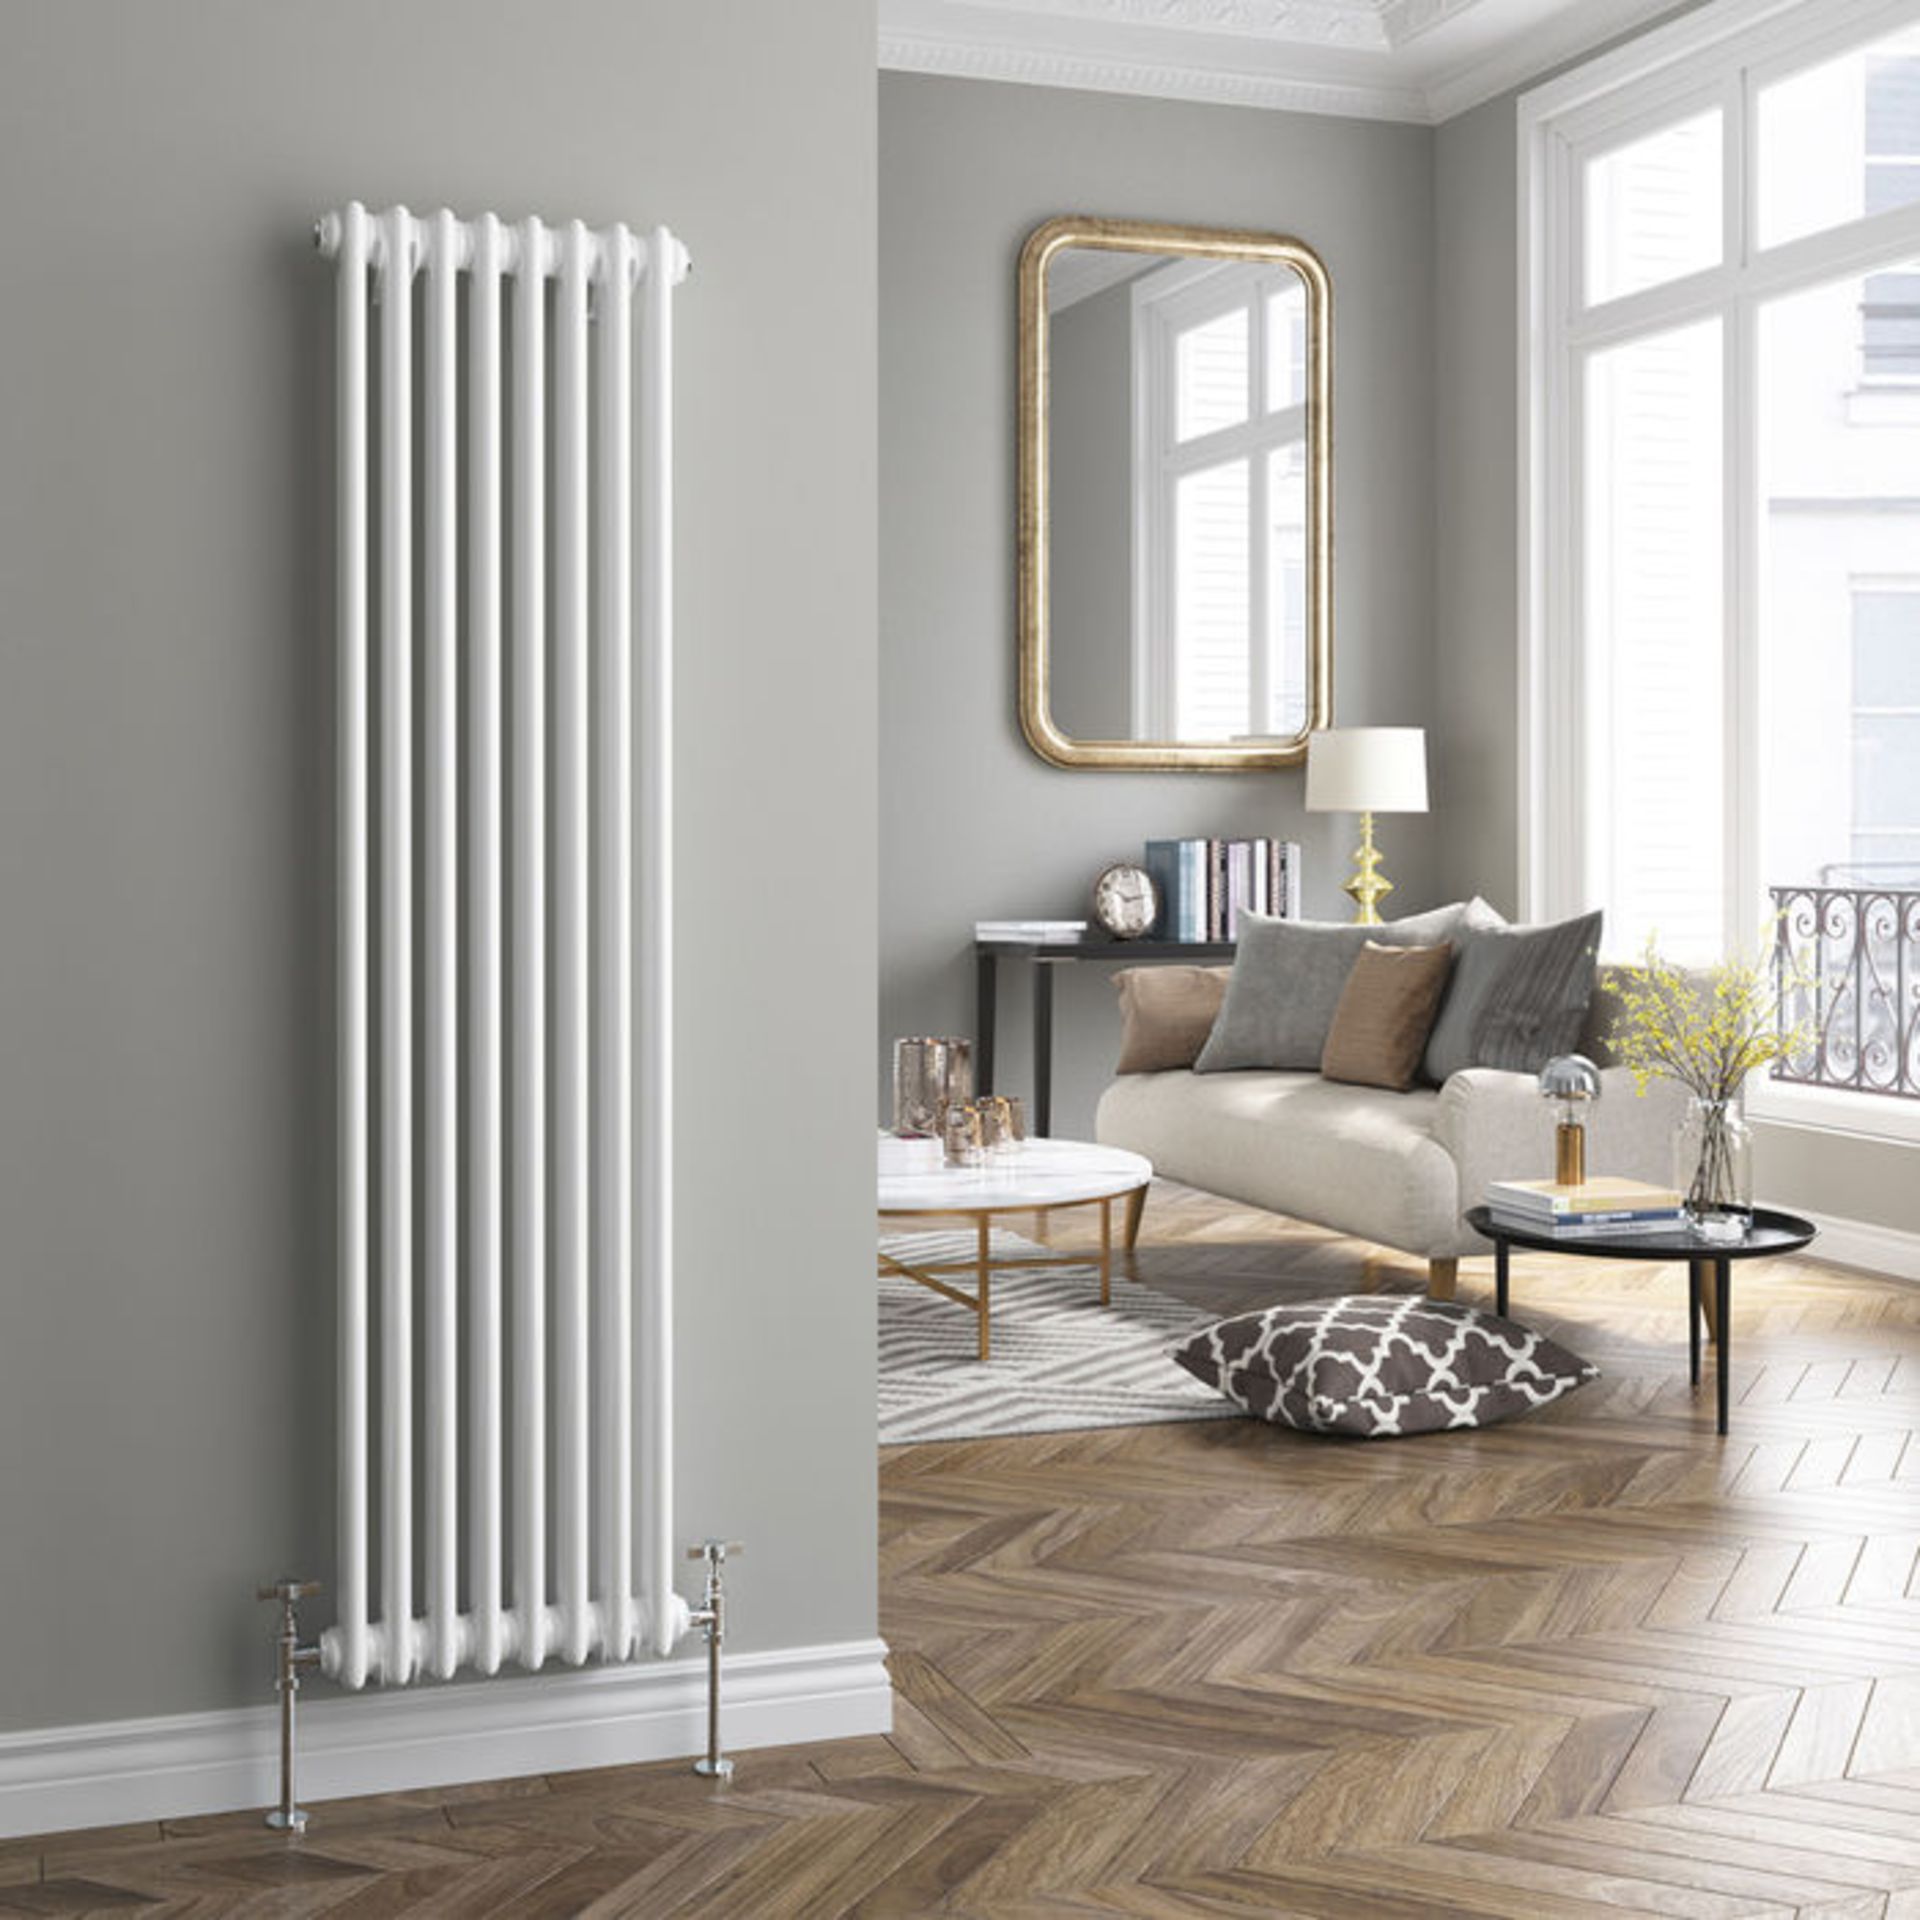 (DK126) 1500x380mm White Double Panel Vertical Colosseum Traditional Radiator. RRP £369.99. Made - Image 2 of 4